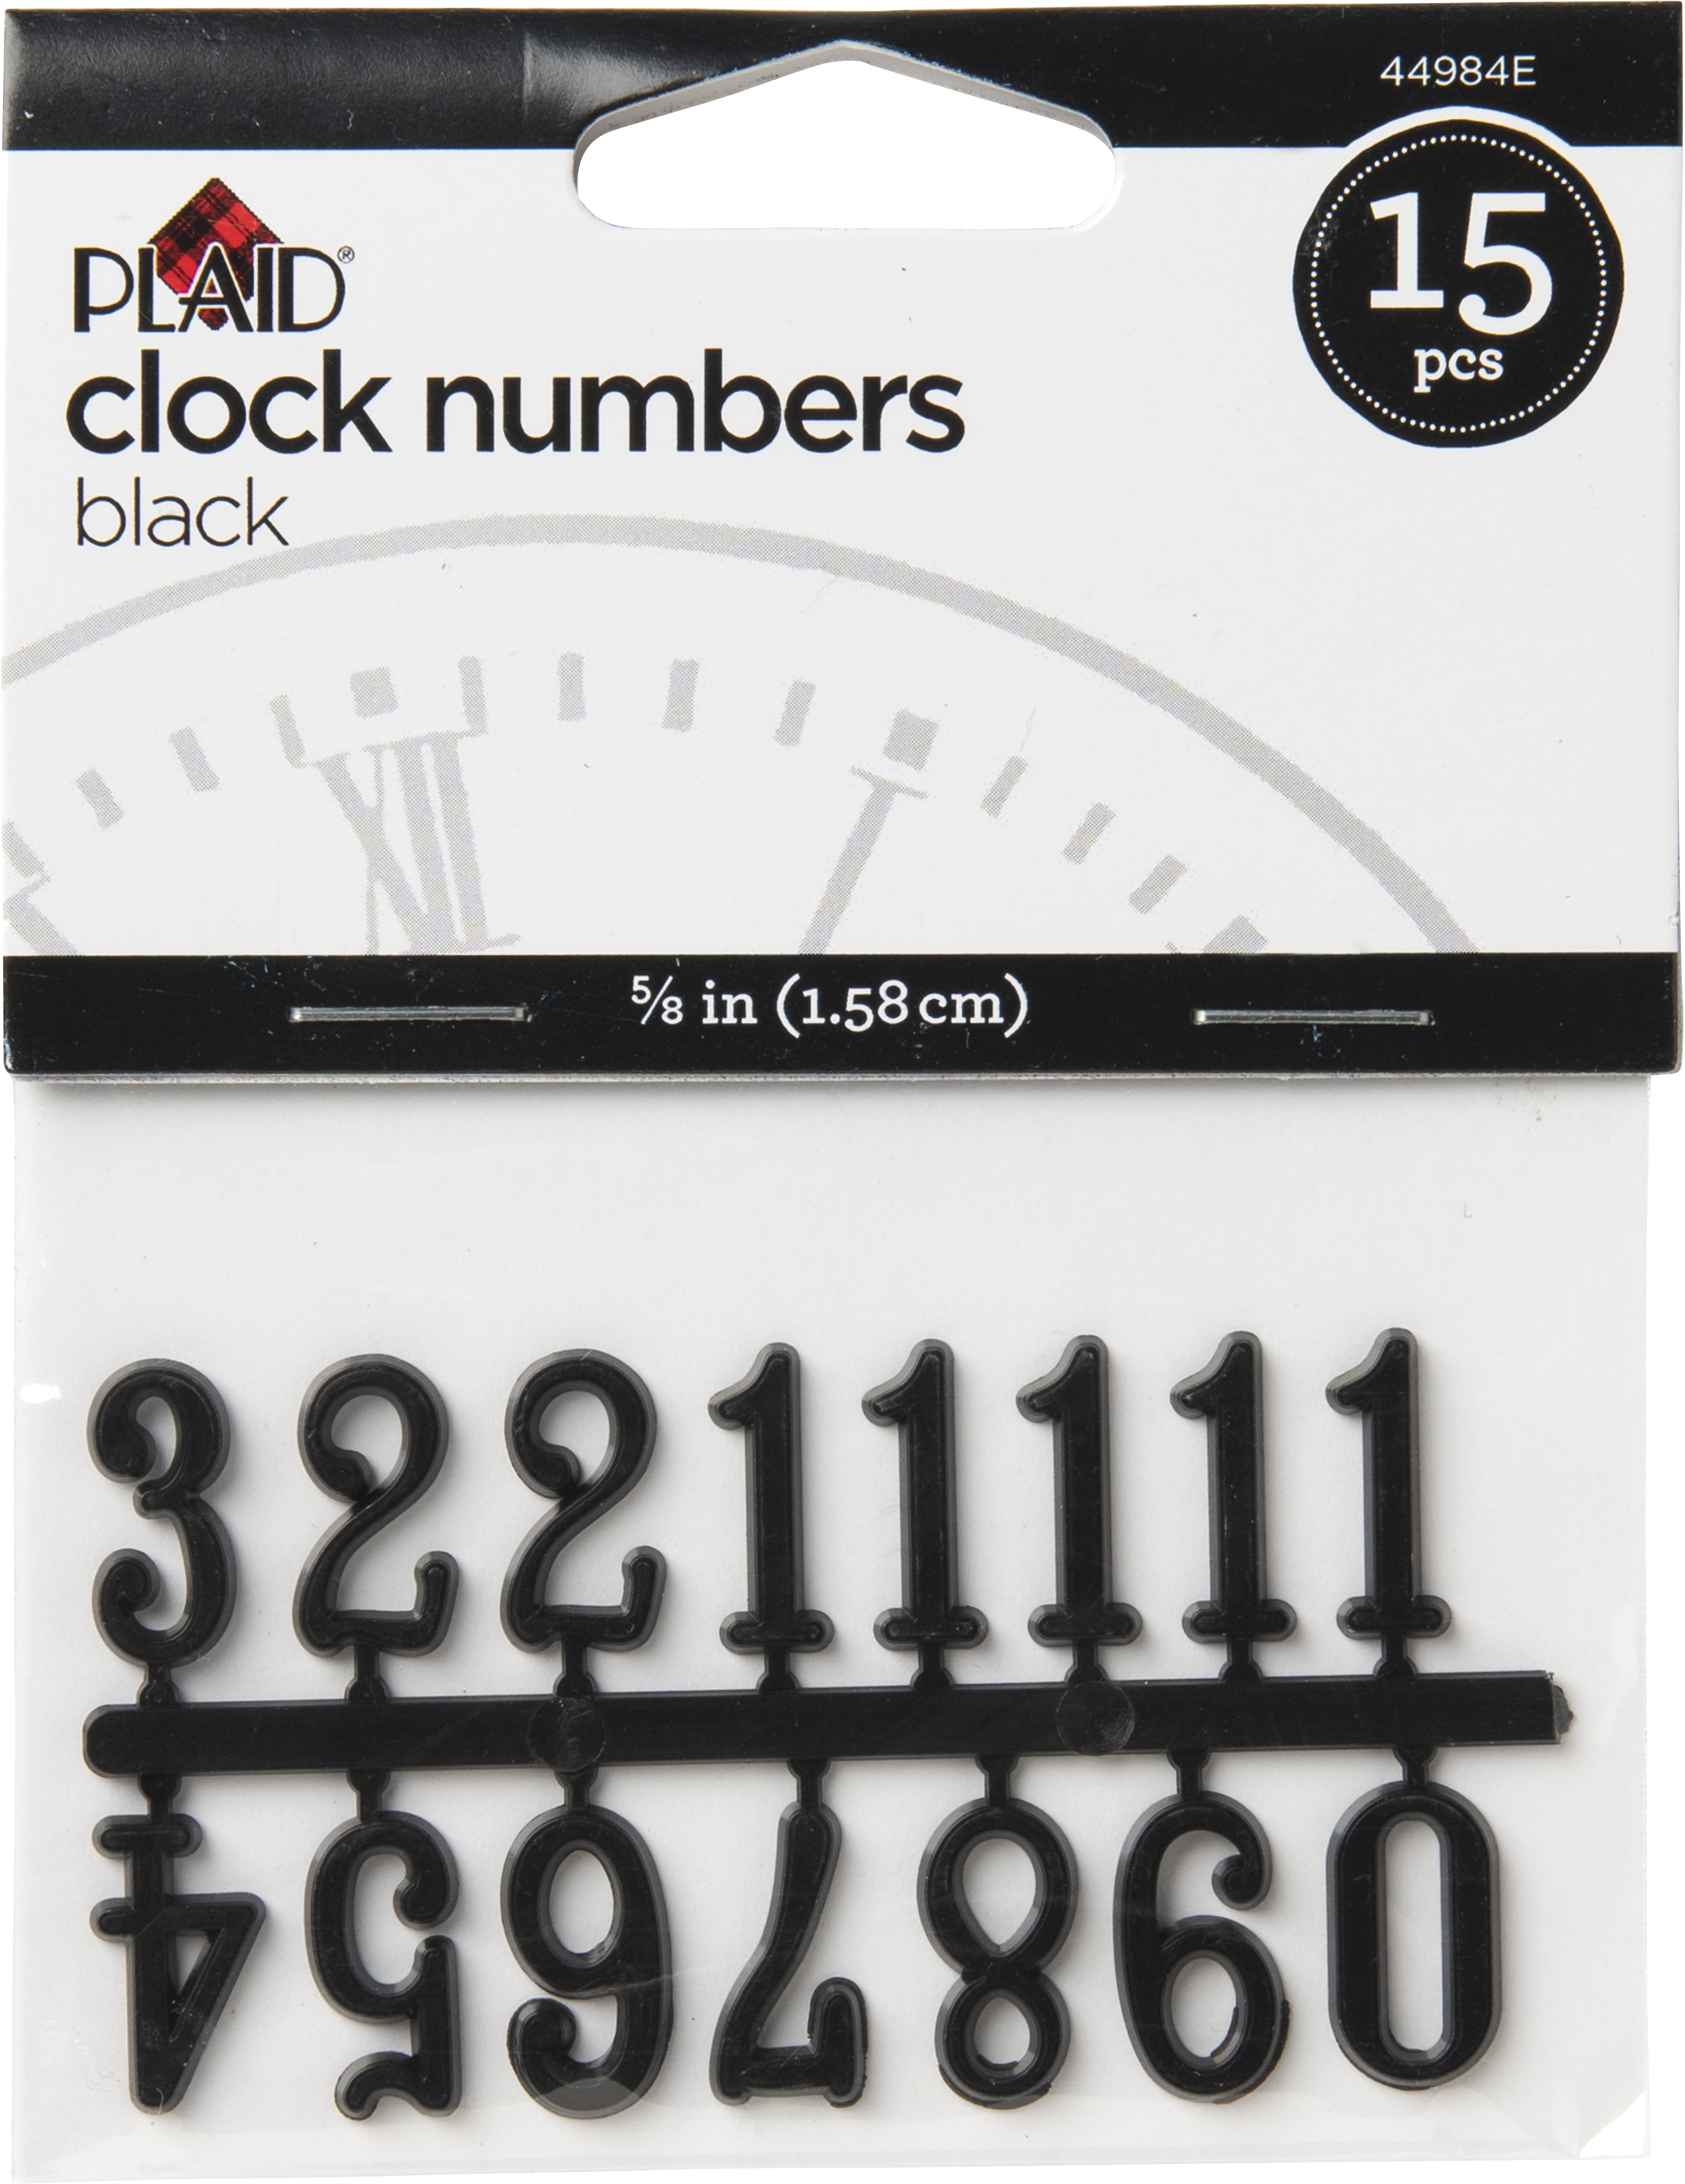 3/8" Self-Adhesive Black Arabic Clock Numbers NEW 10 SETS Hot stamped USA made 